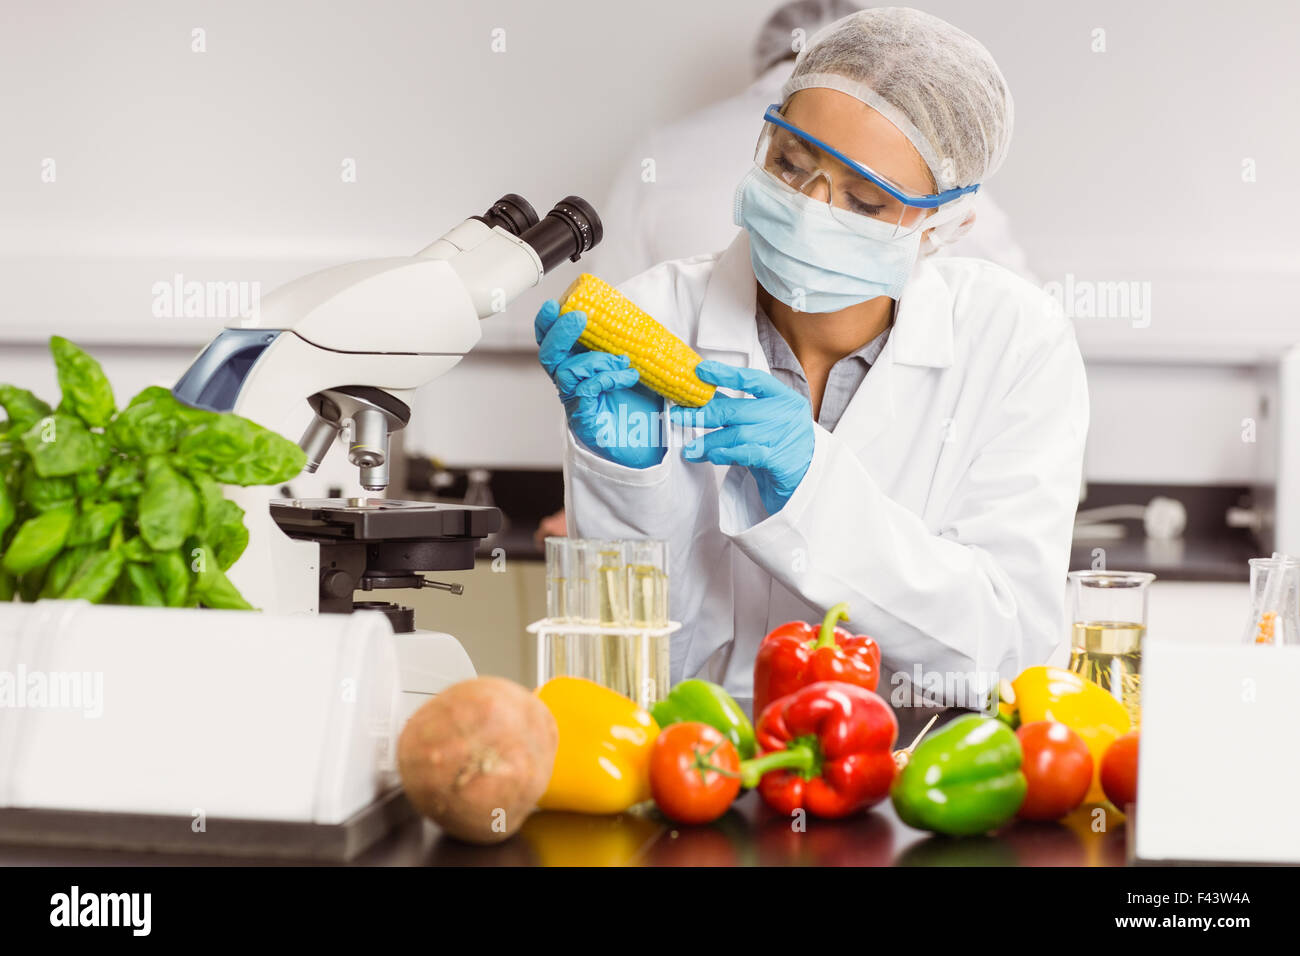 Food Scientist High Resolution Stock Photography and Images - Alamy